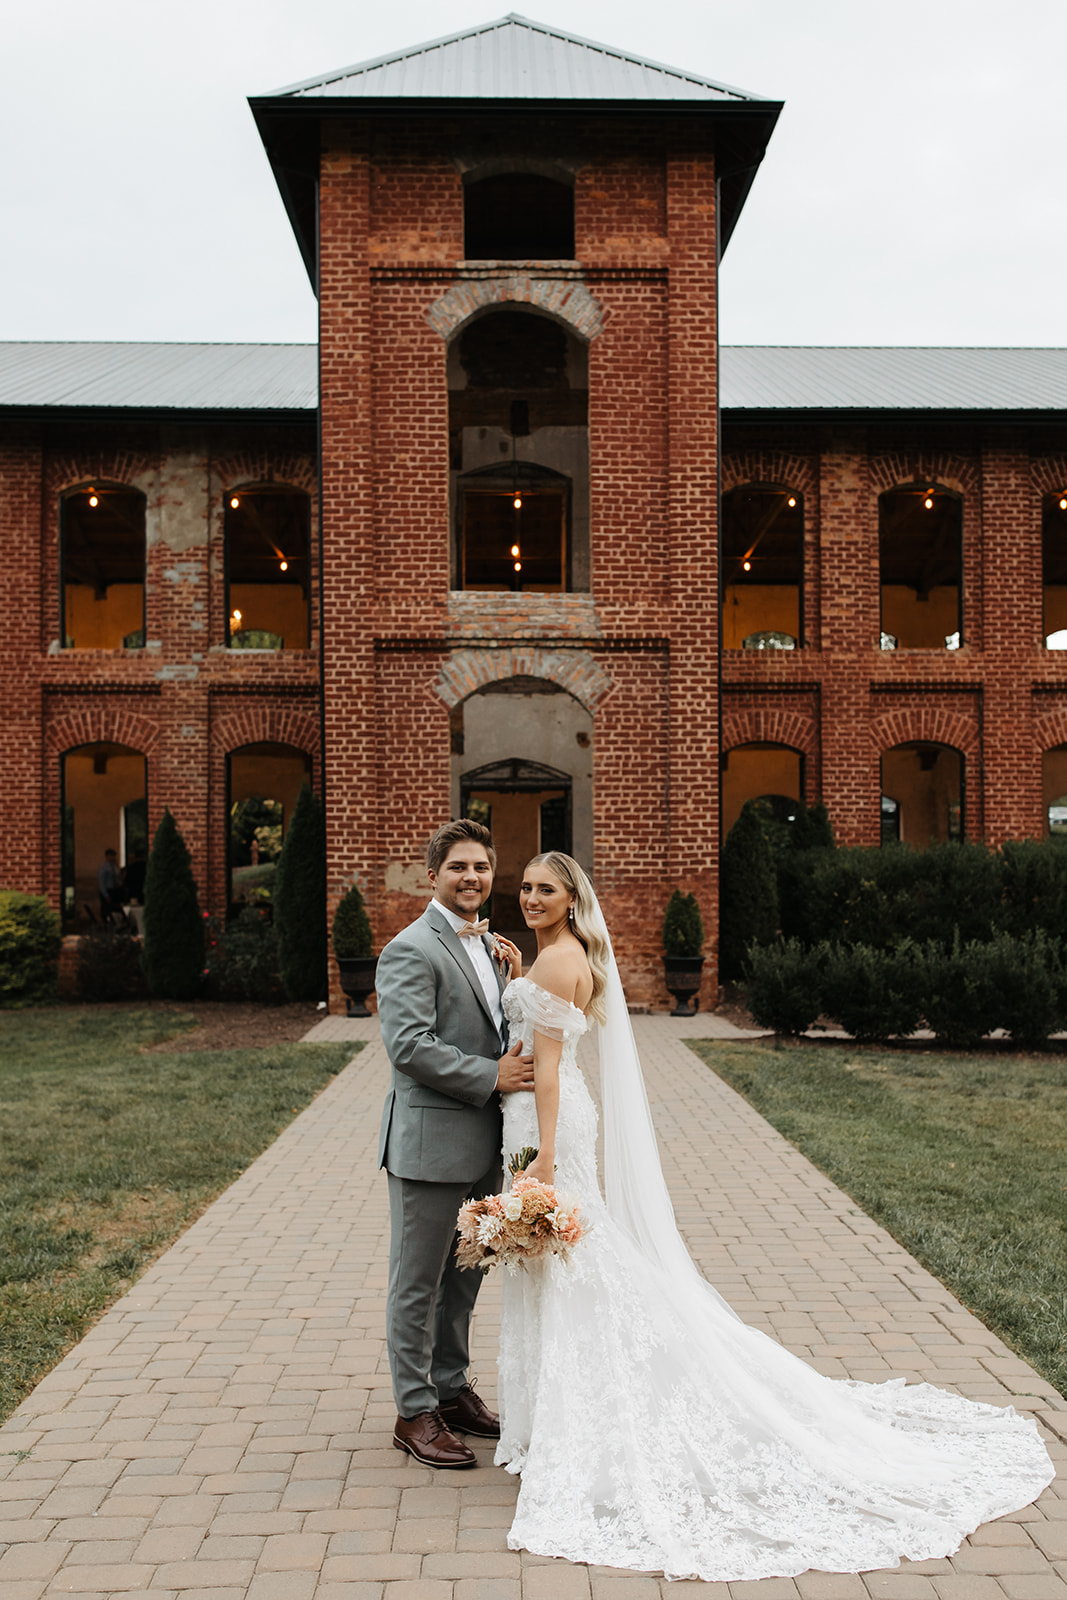 the couple standing in front of their unique wedding venue